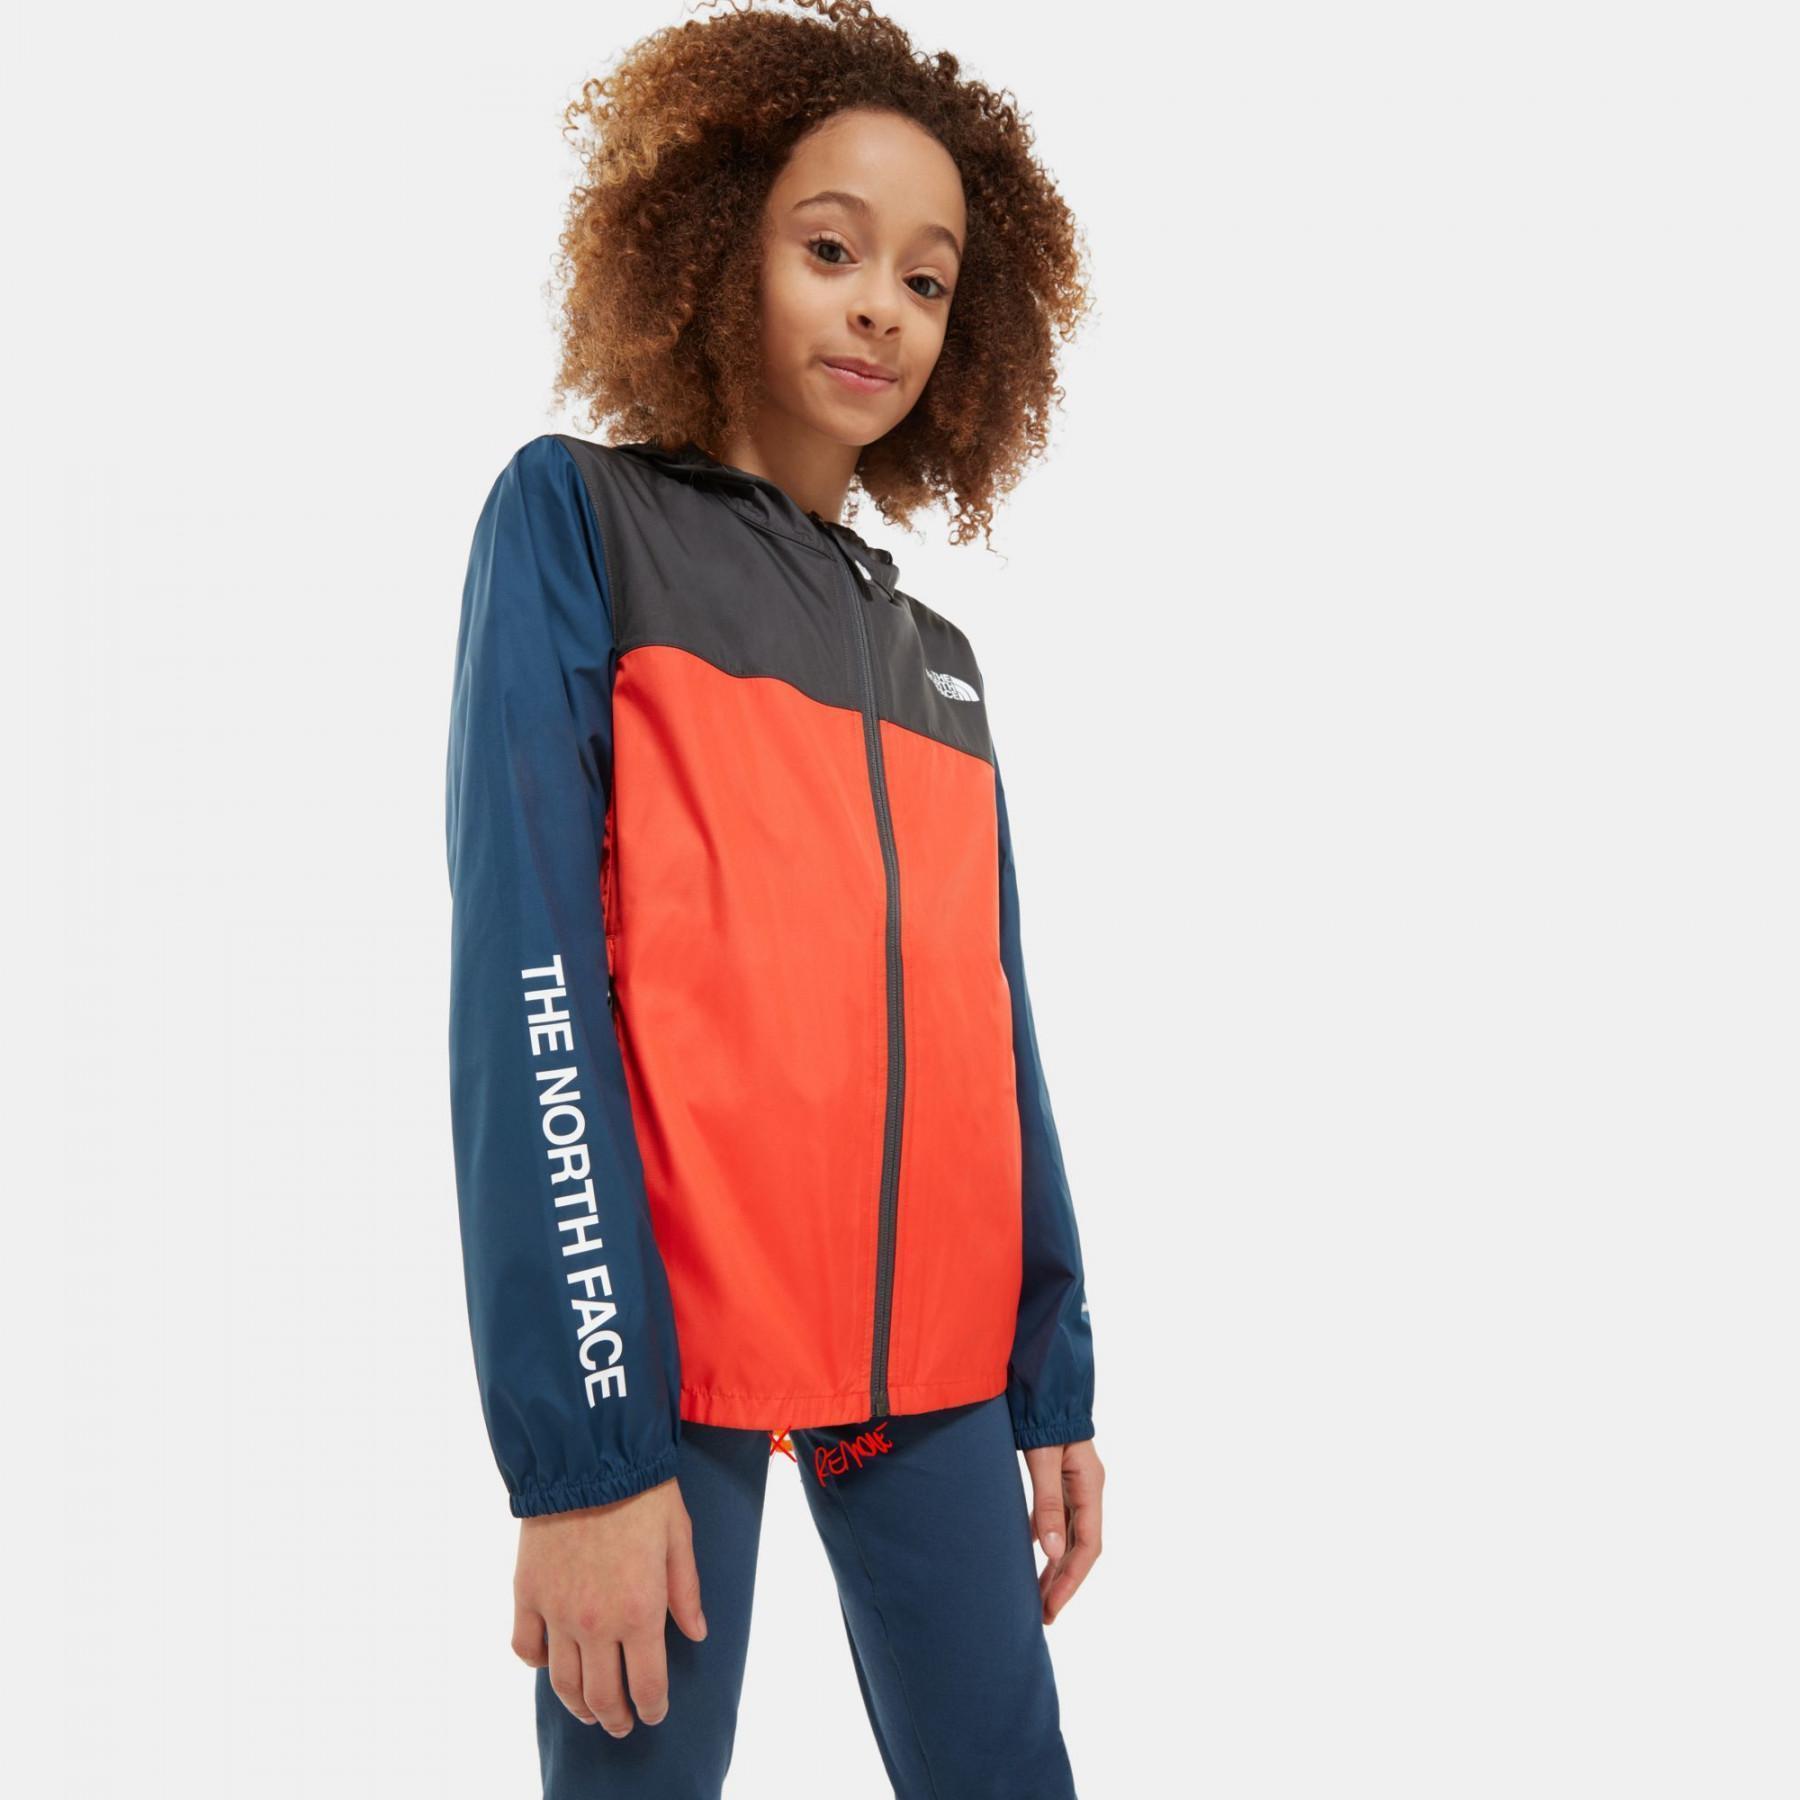 Children's windcheater The North Face Reactor